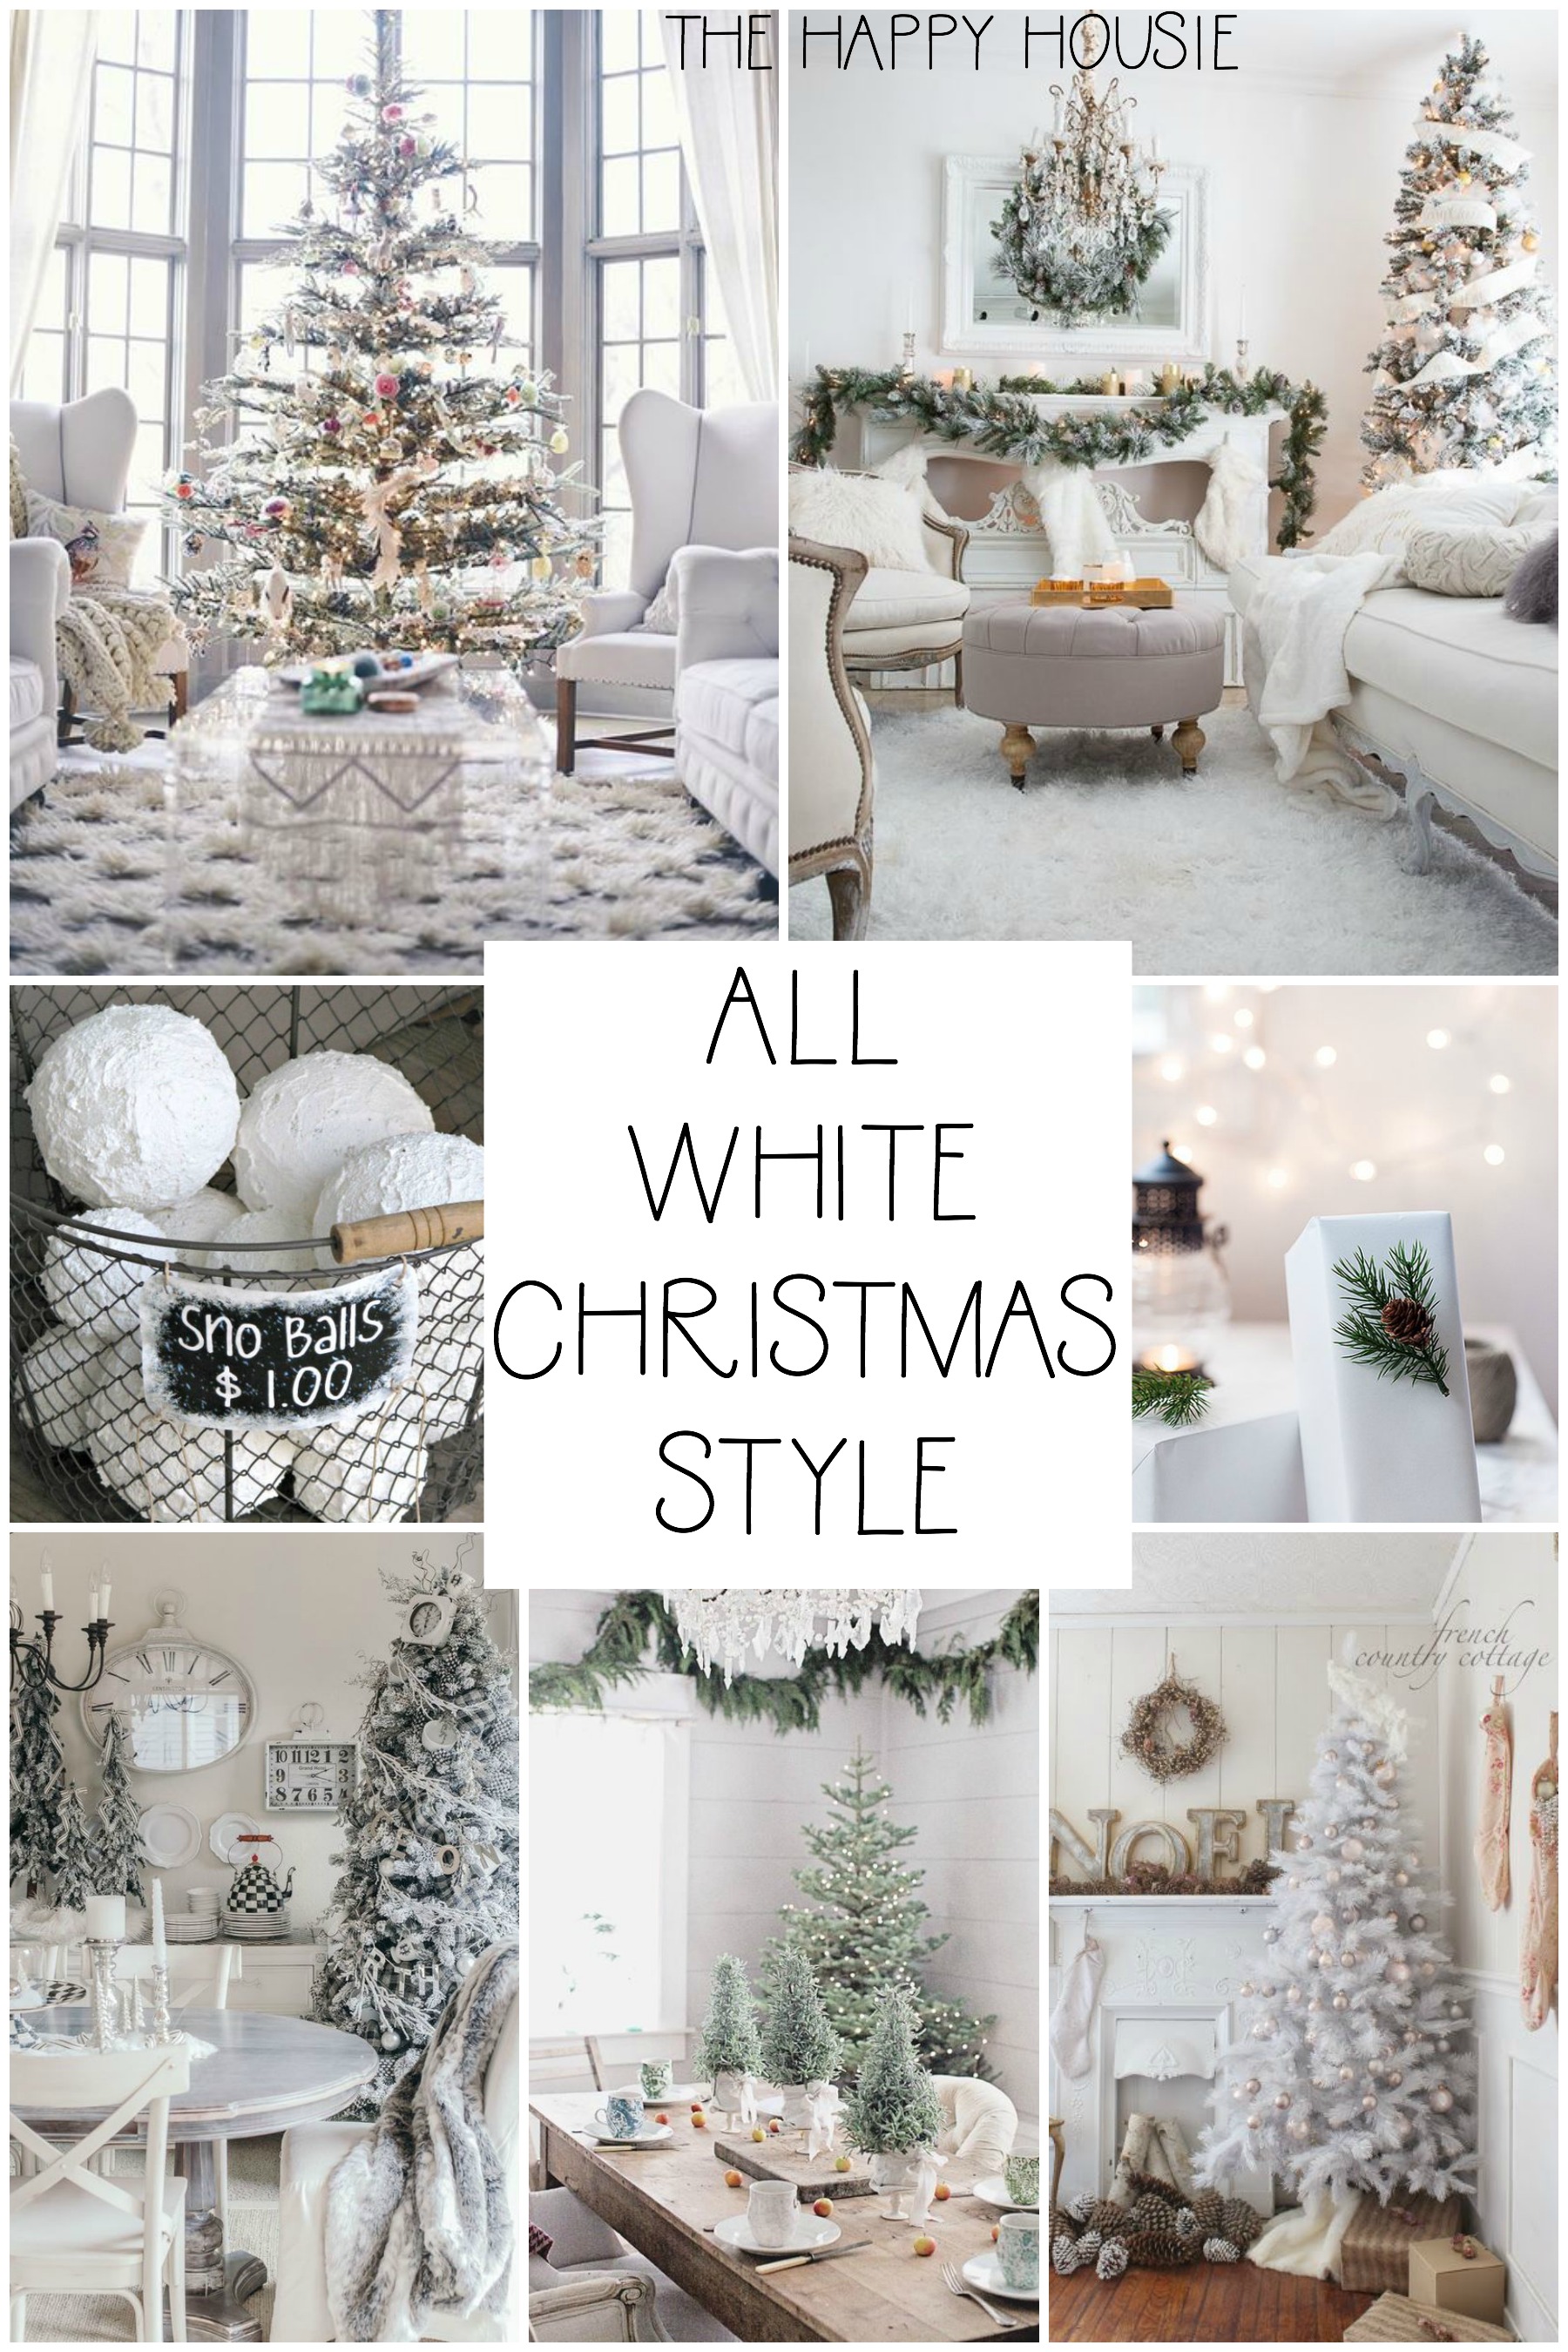 All White Christmas Style poster.